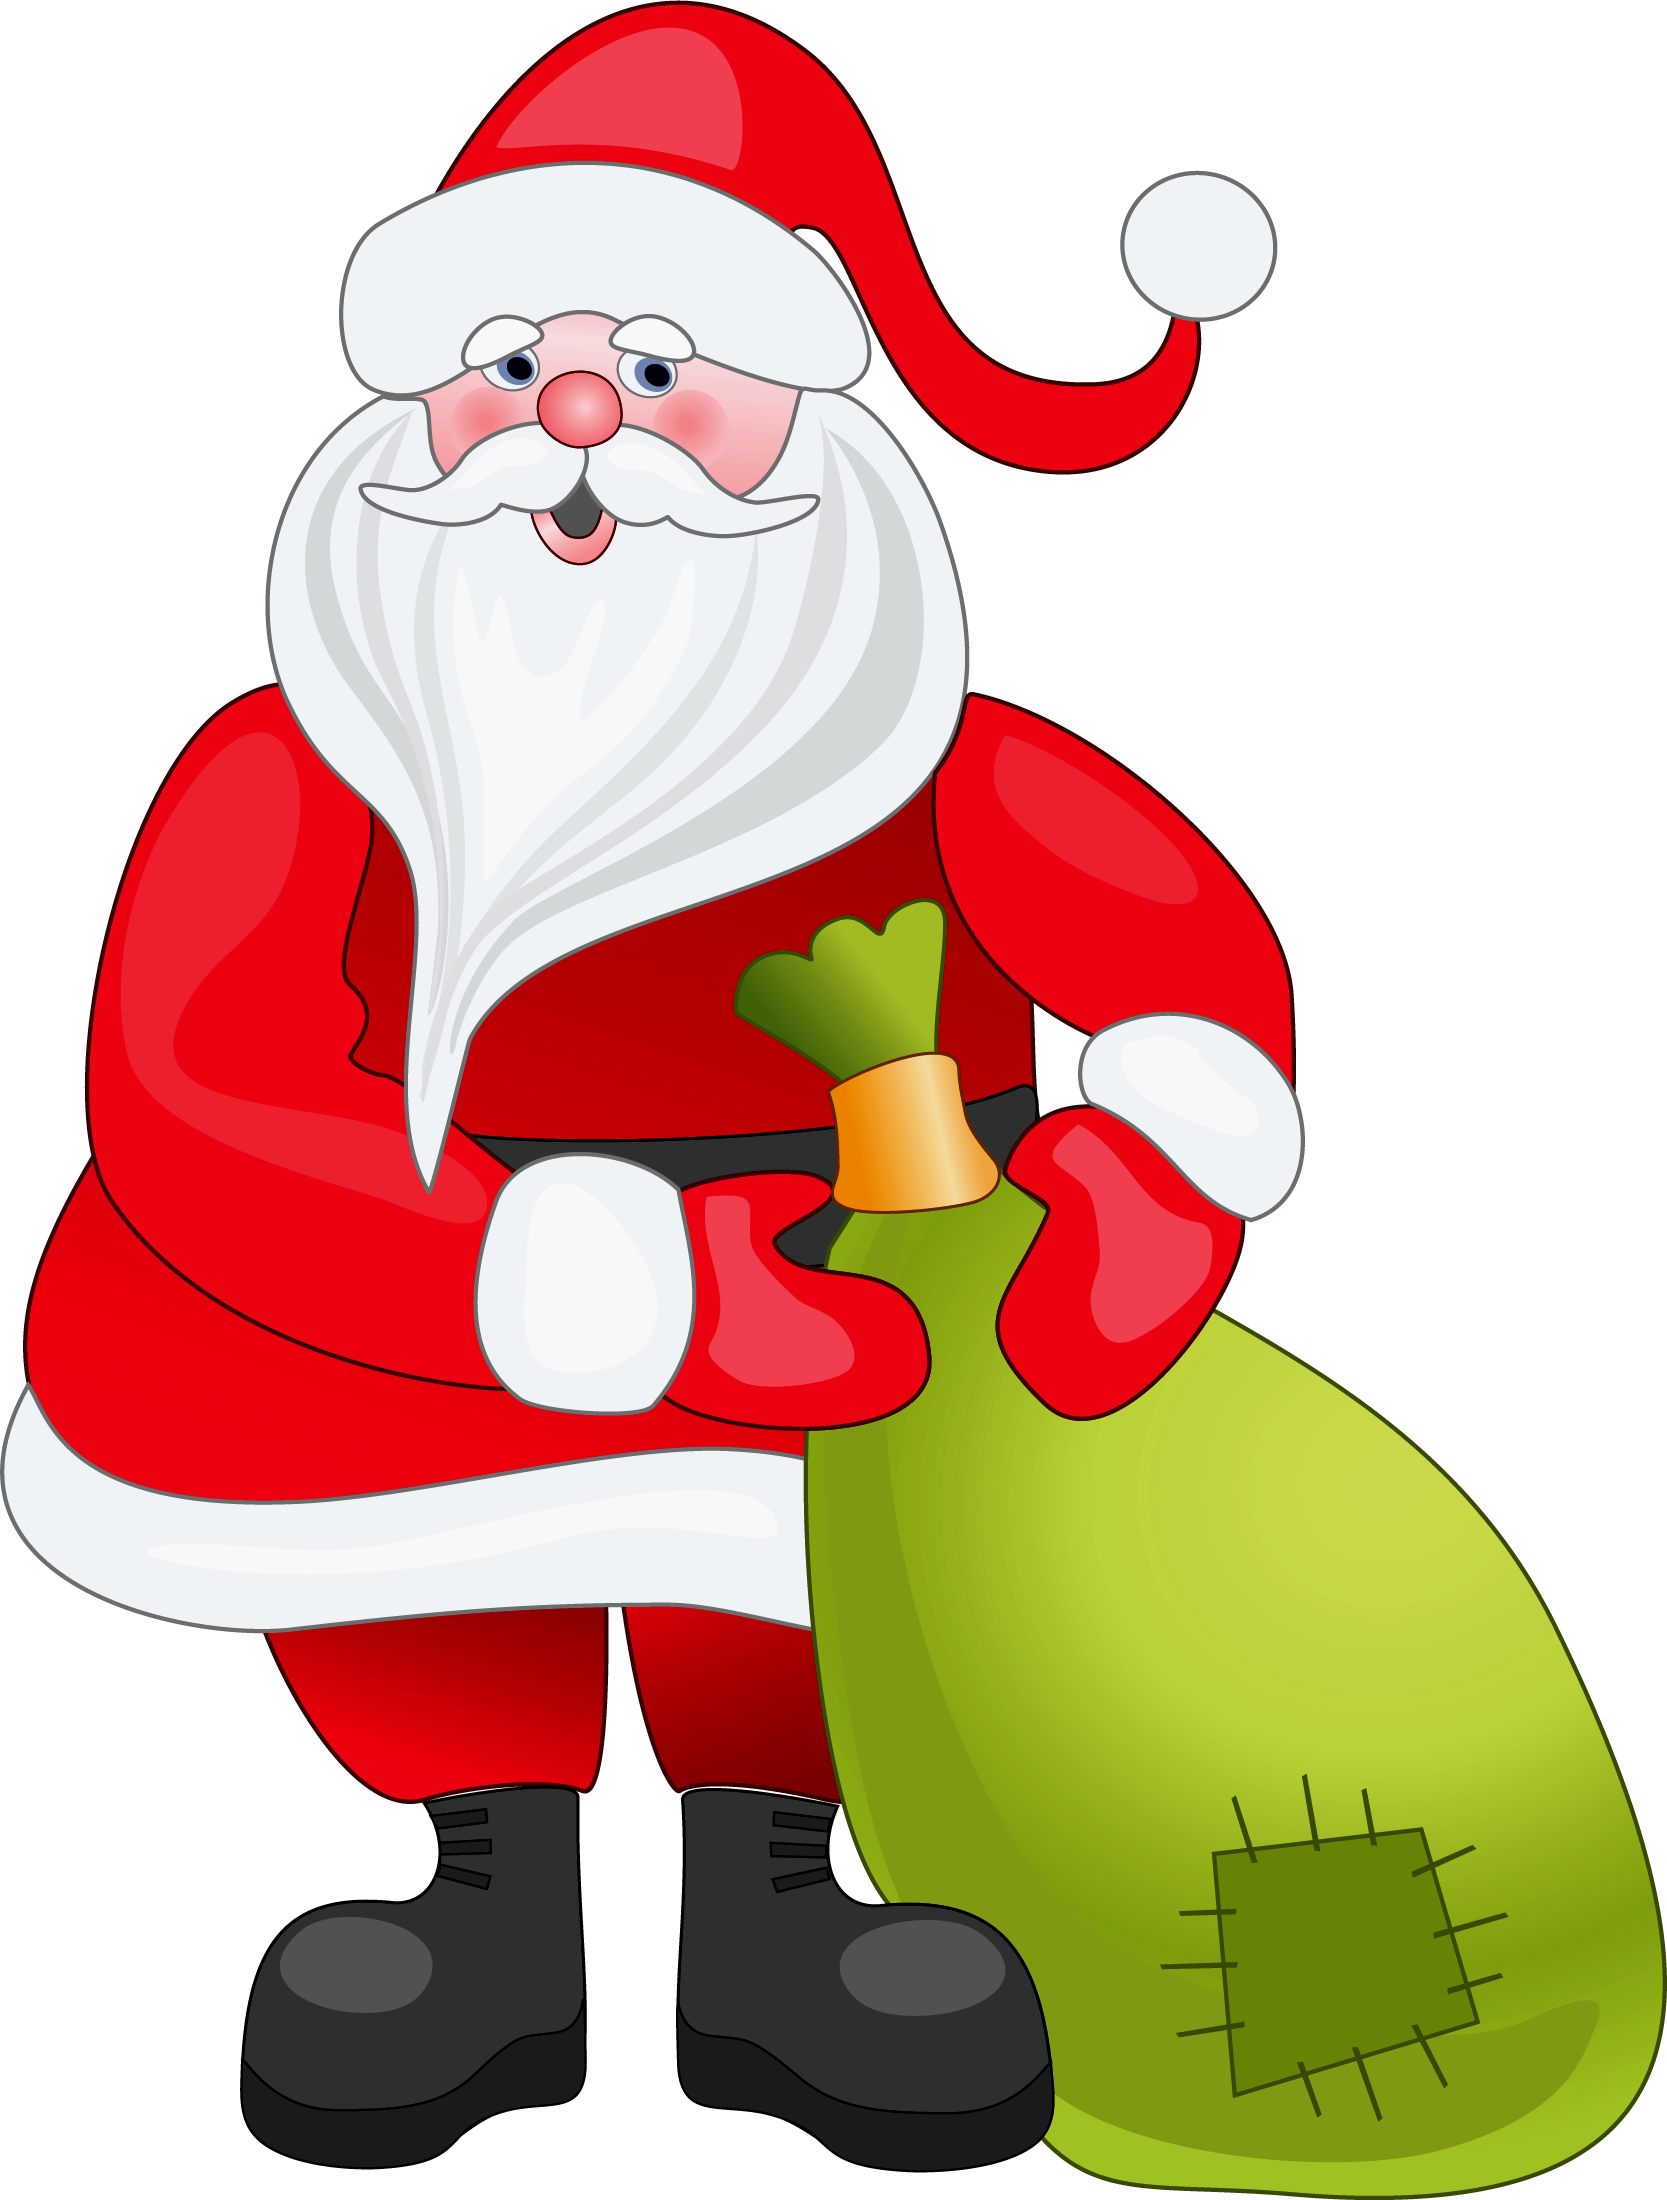 Free Santa Claus Pictures Images, Download Free Santa Claus Pictures